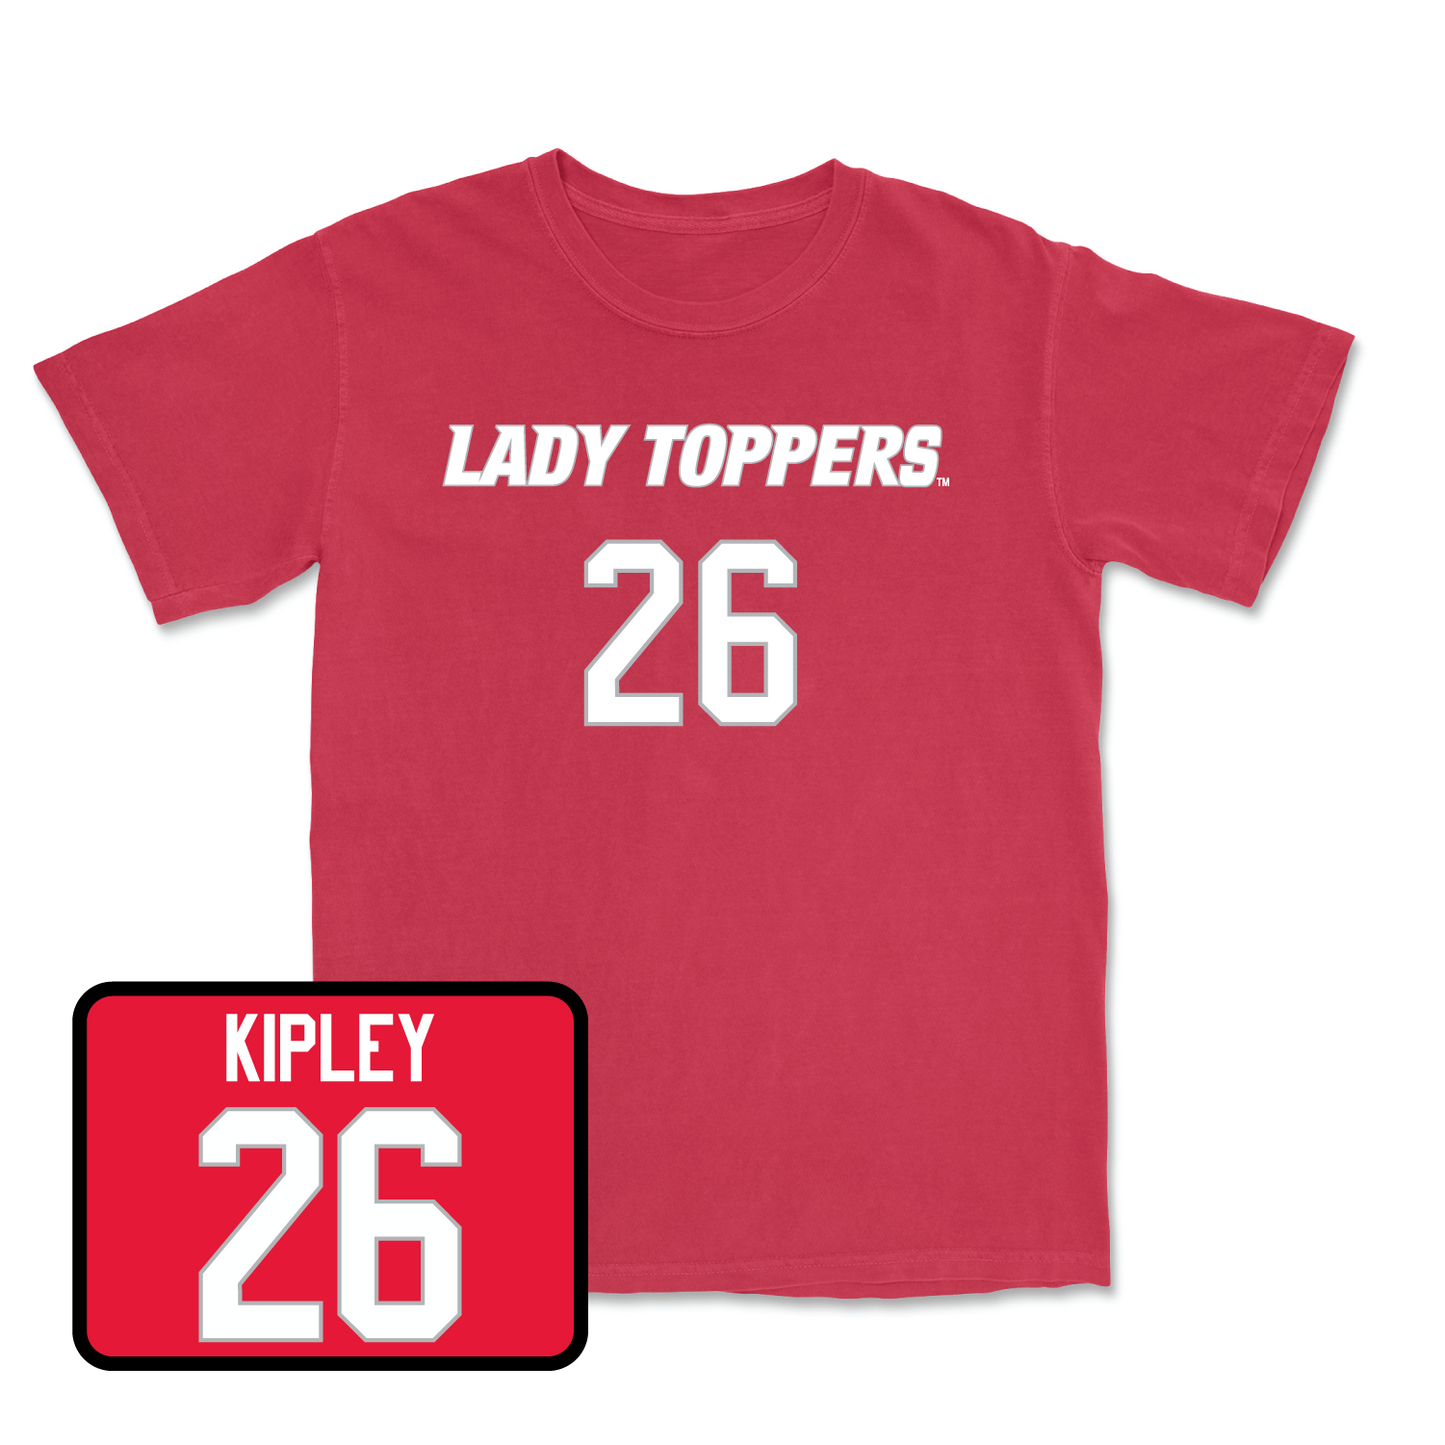 Red Women's Soccer Lady Toppers Player Tee 2 4X-Large / Kora Kipley | #26